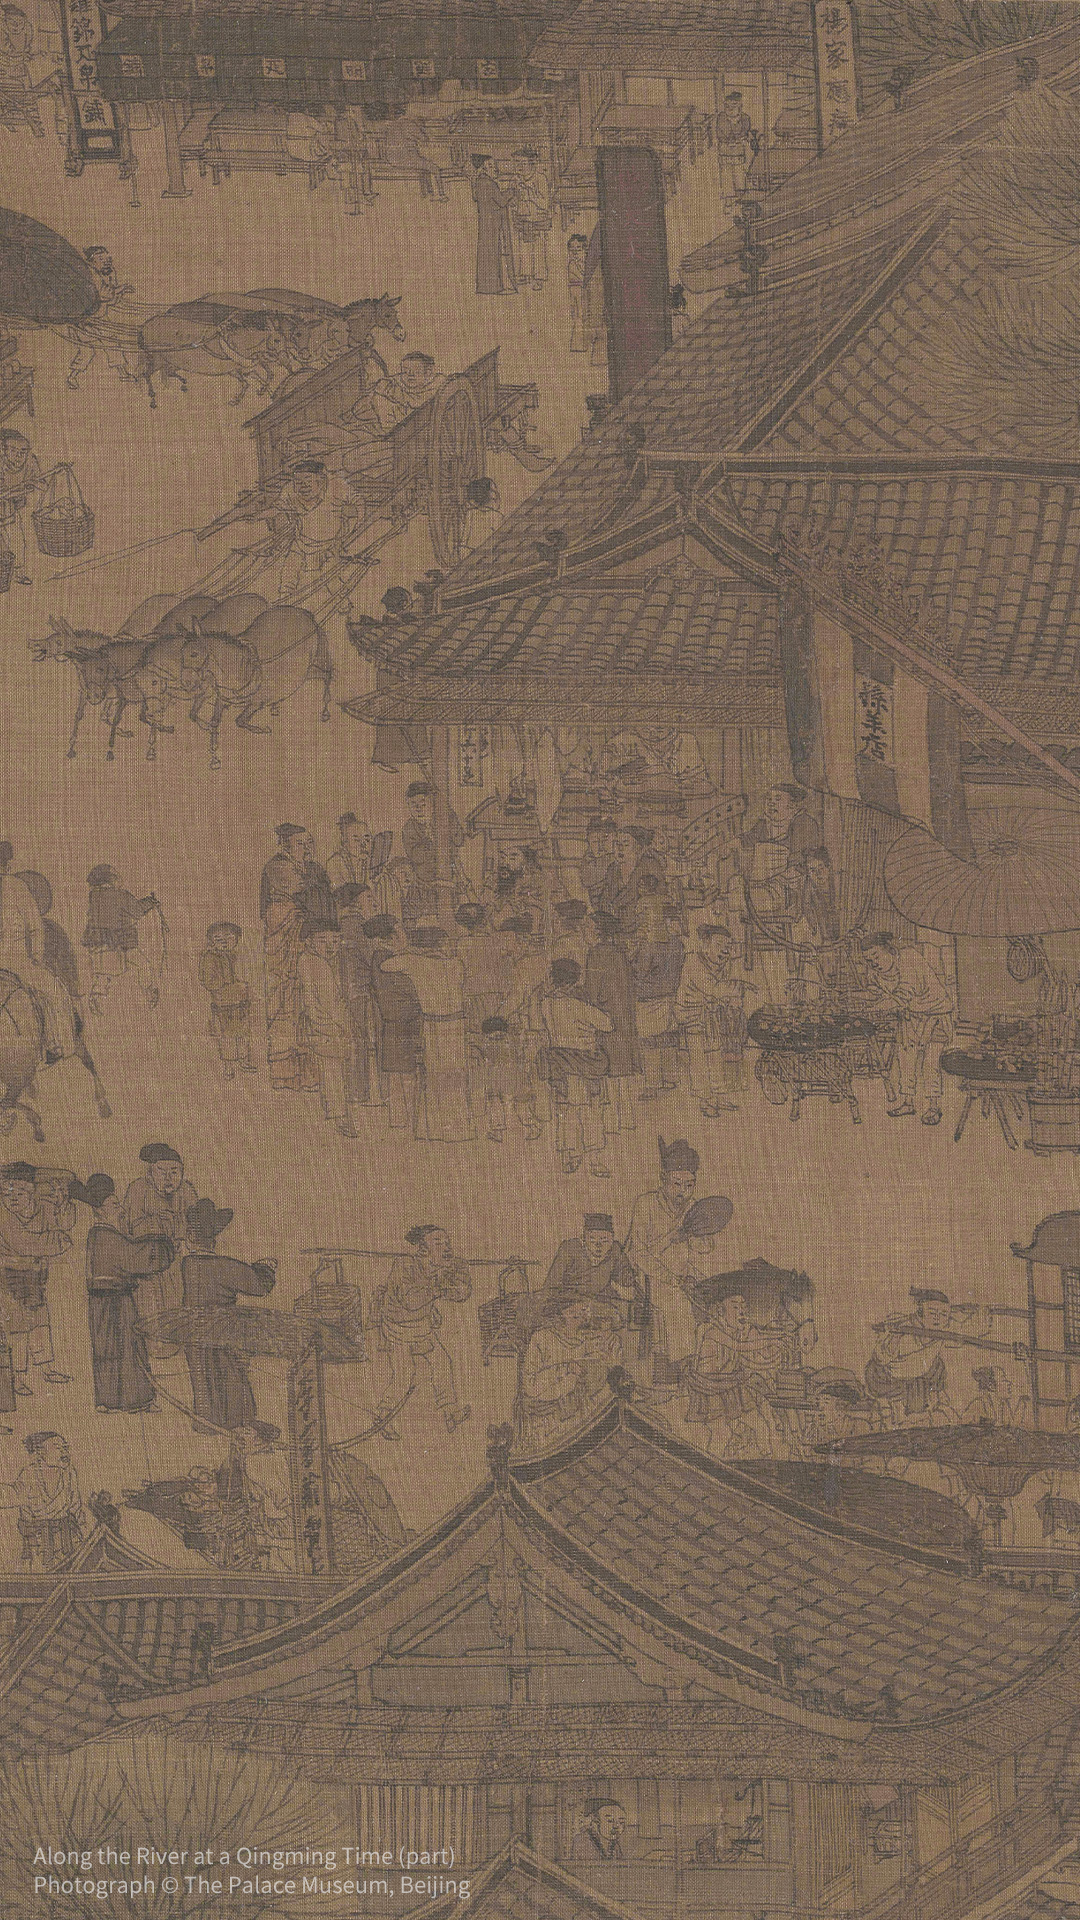 Are you interested in souvenirs from a market in the Song Dynasty?